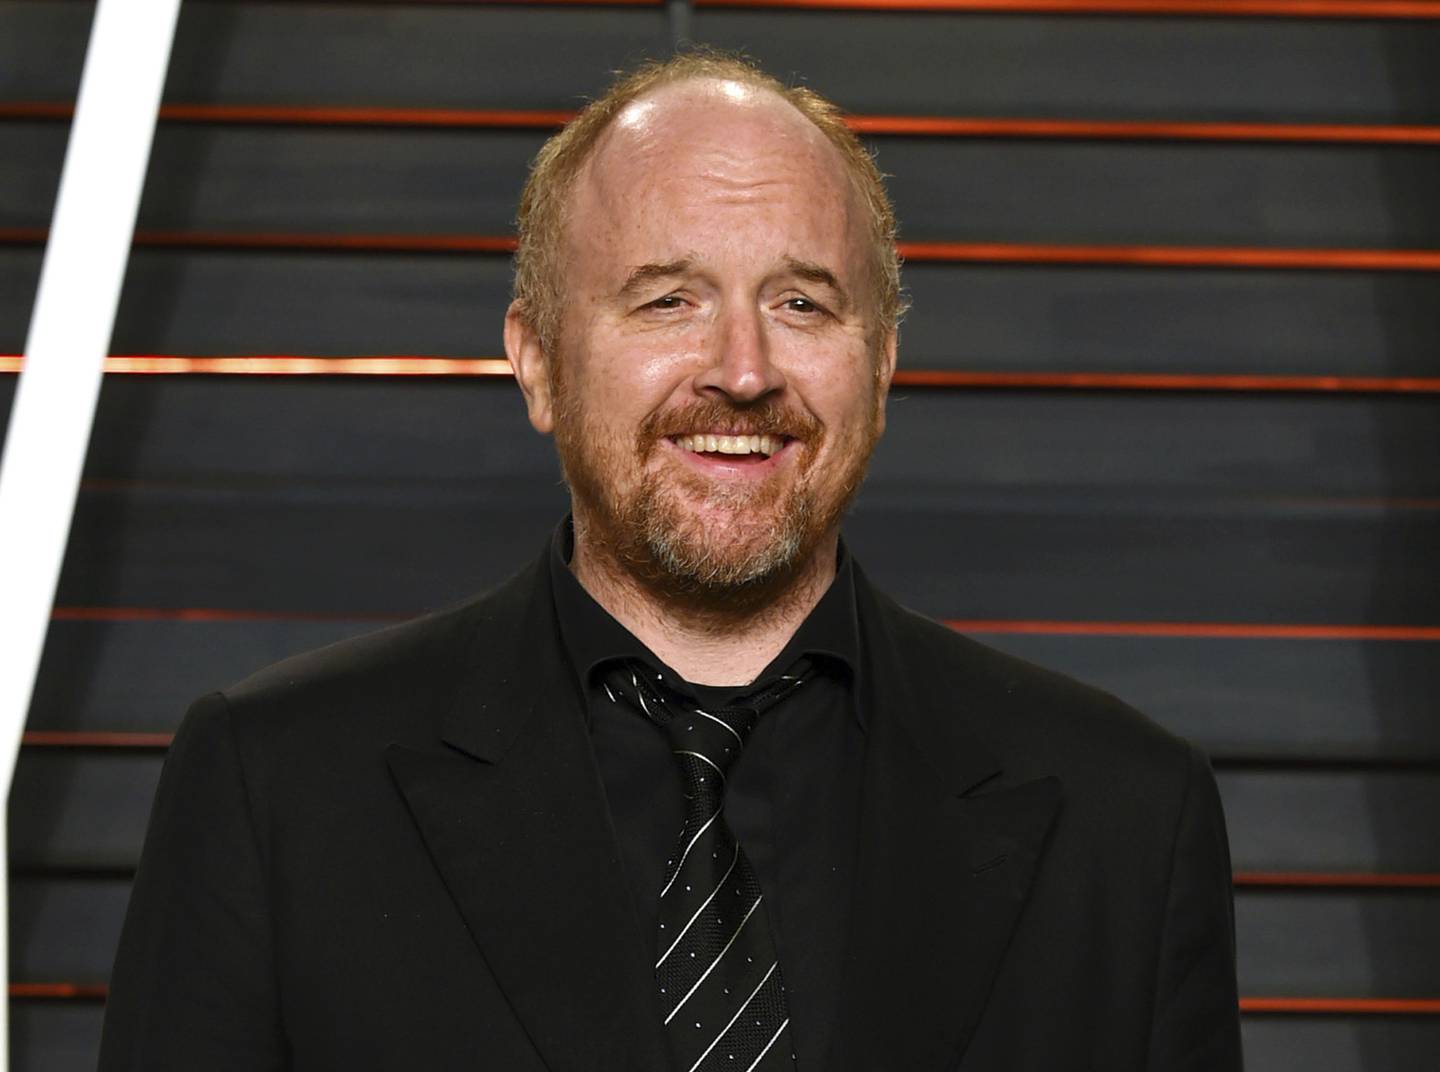 Accused of sexual misconduct, Louis CK is up for Best Comedy Album. Invision / AP